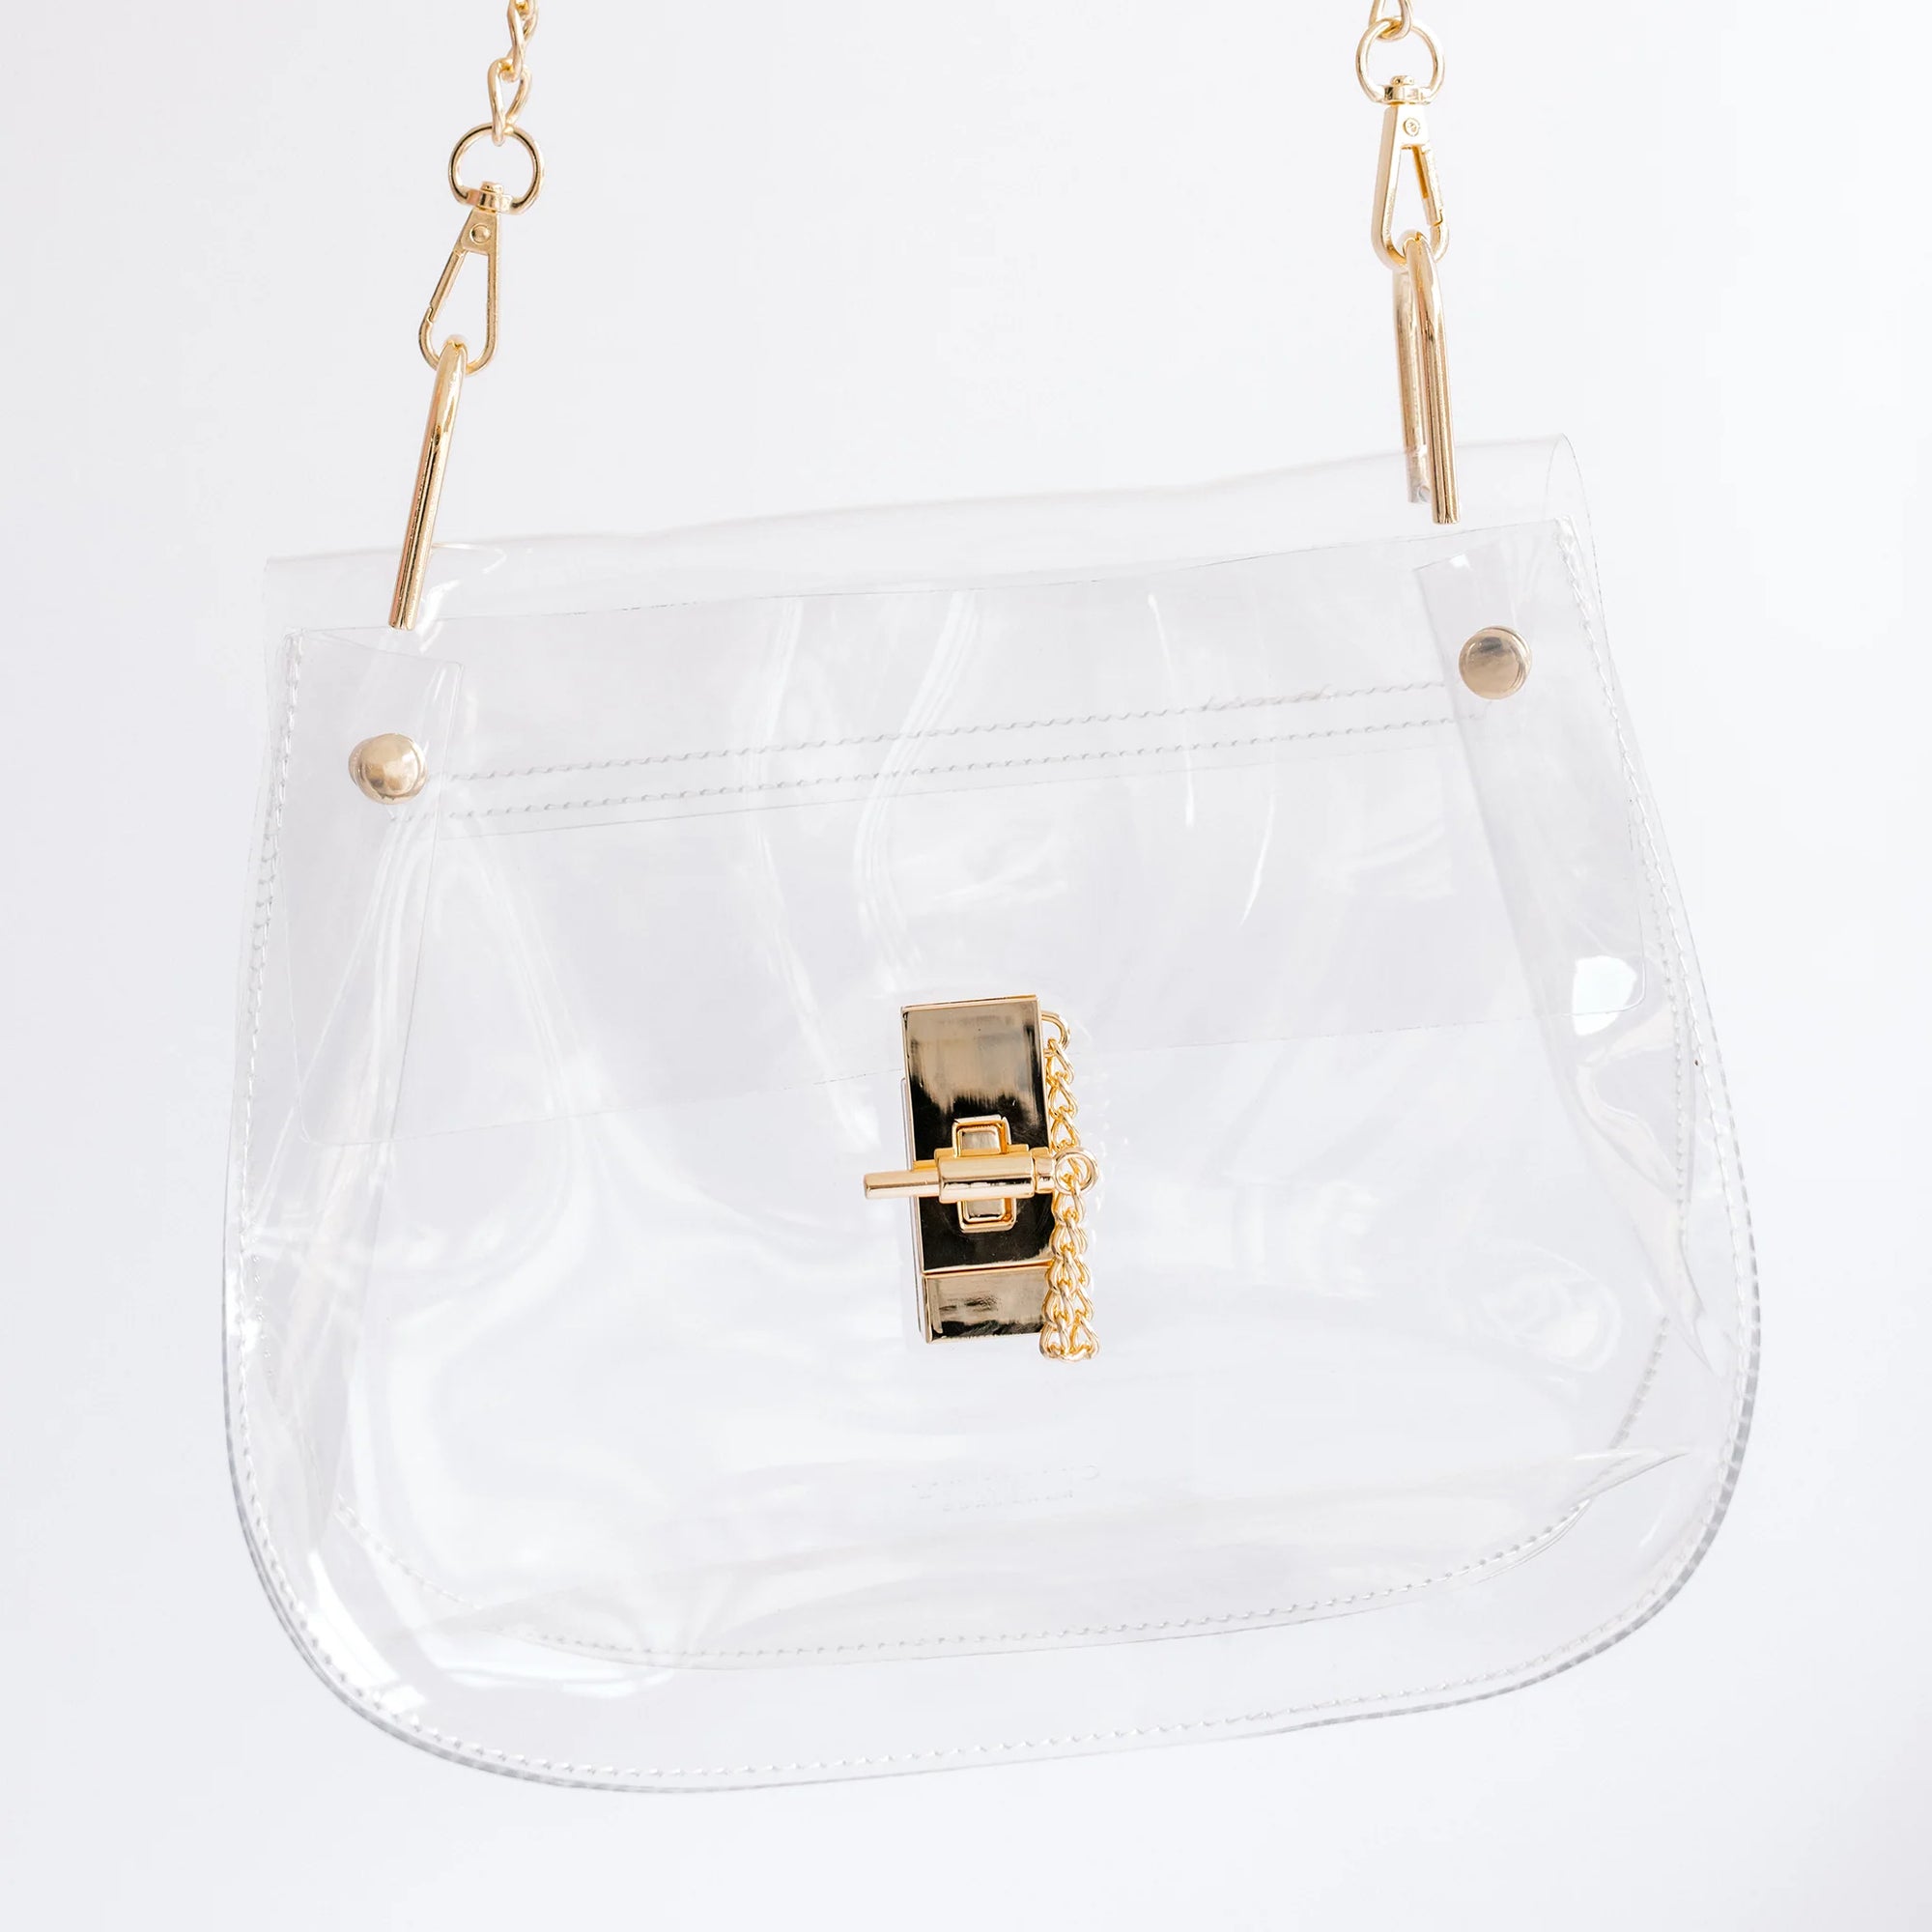 The Ginger Clear Bag